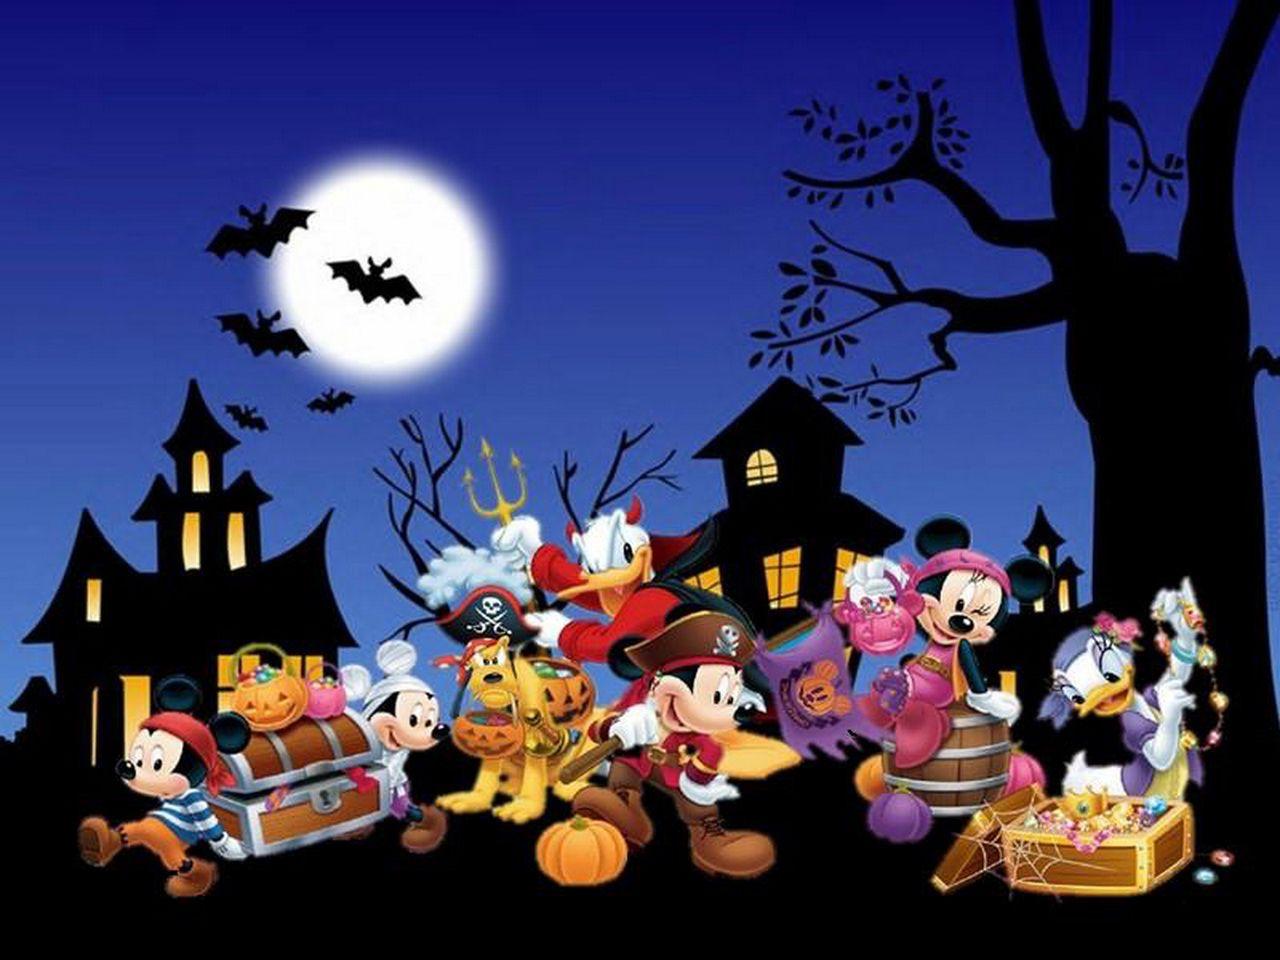 Halloween Live Wallpaper Free Android Apps on Google Play 1280